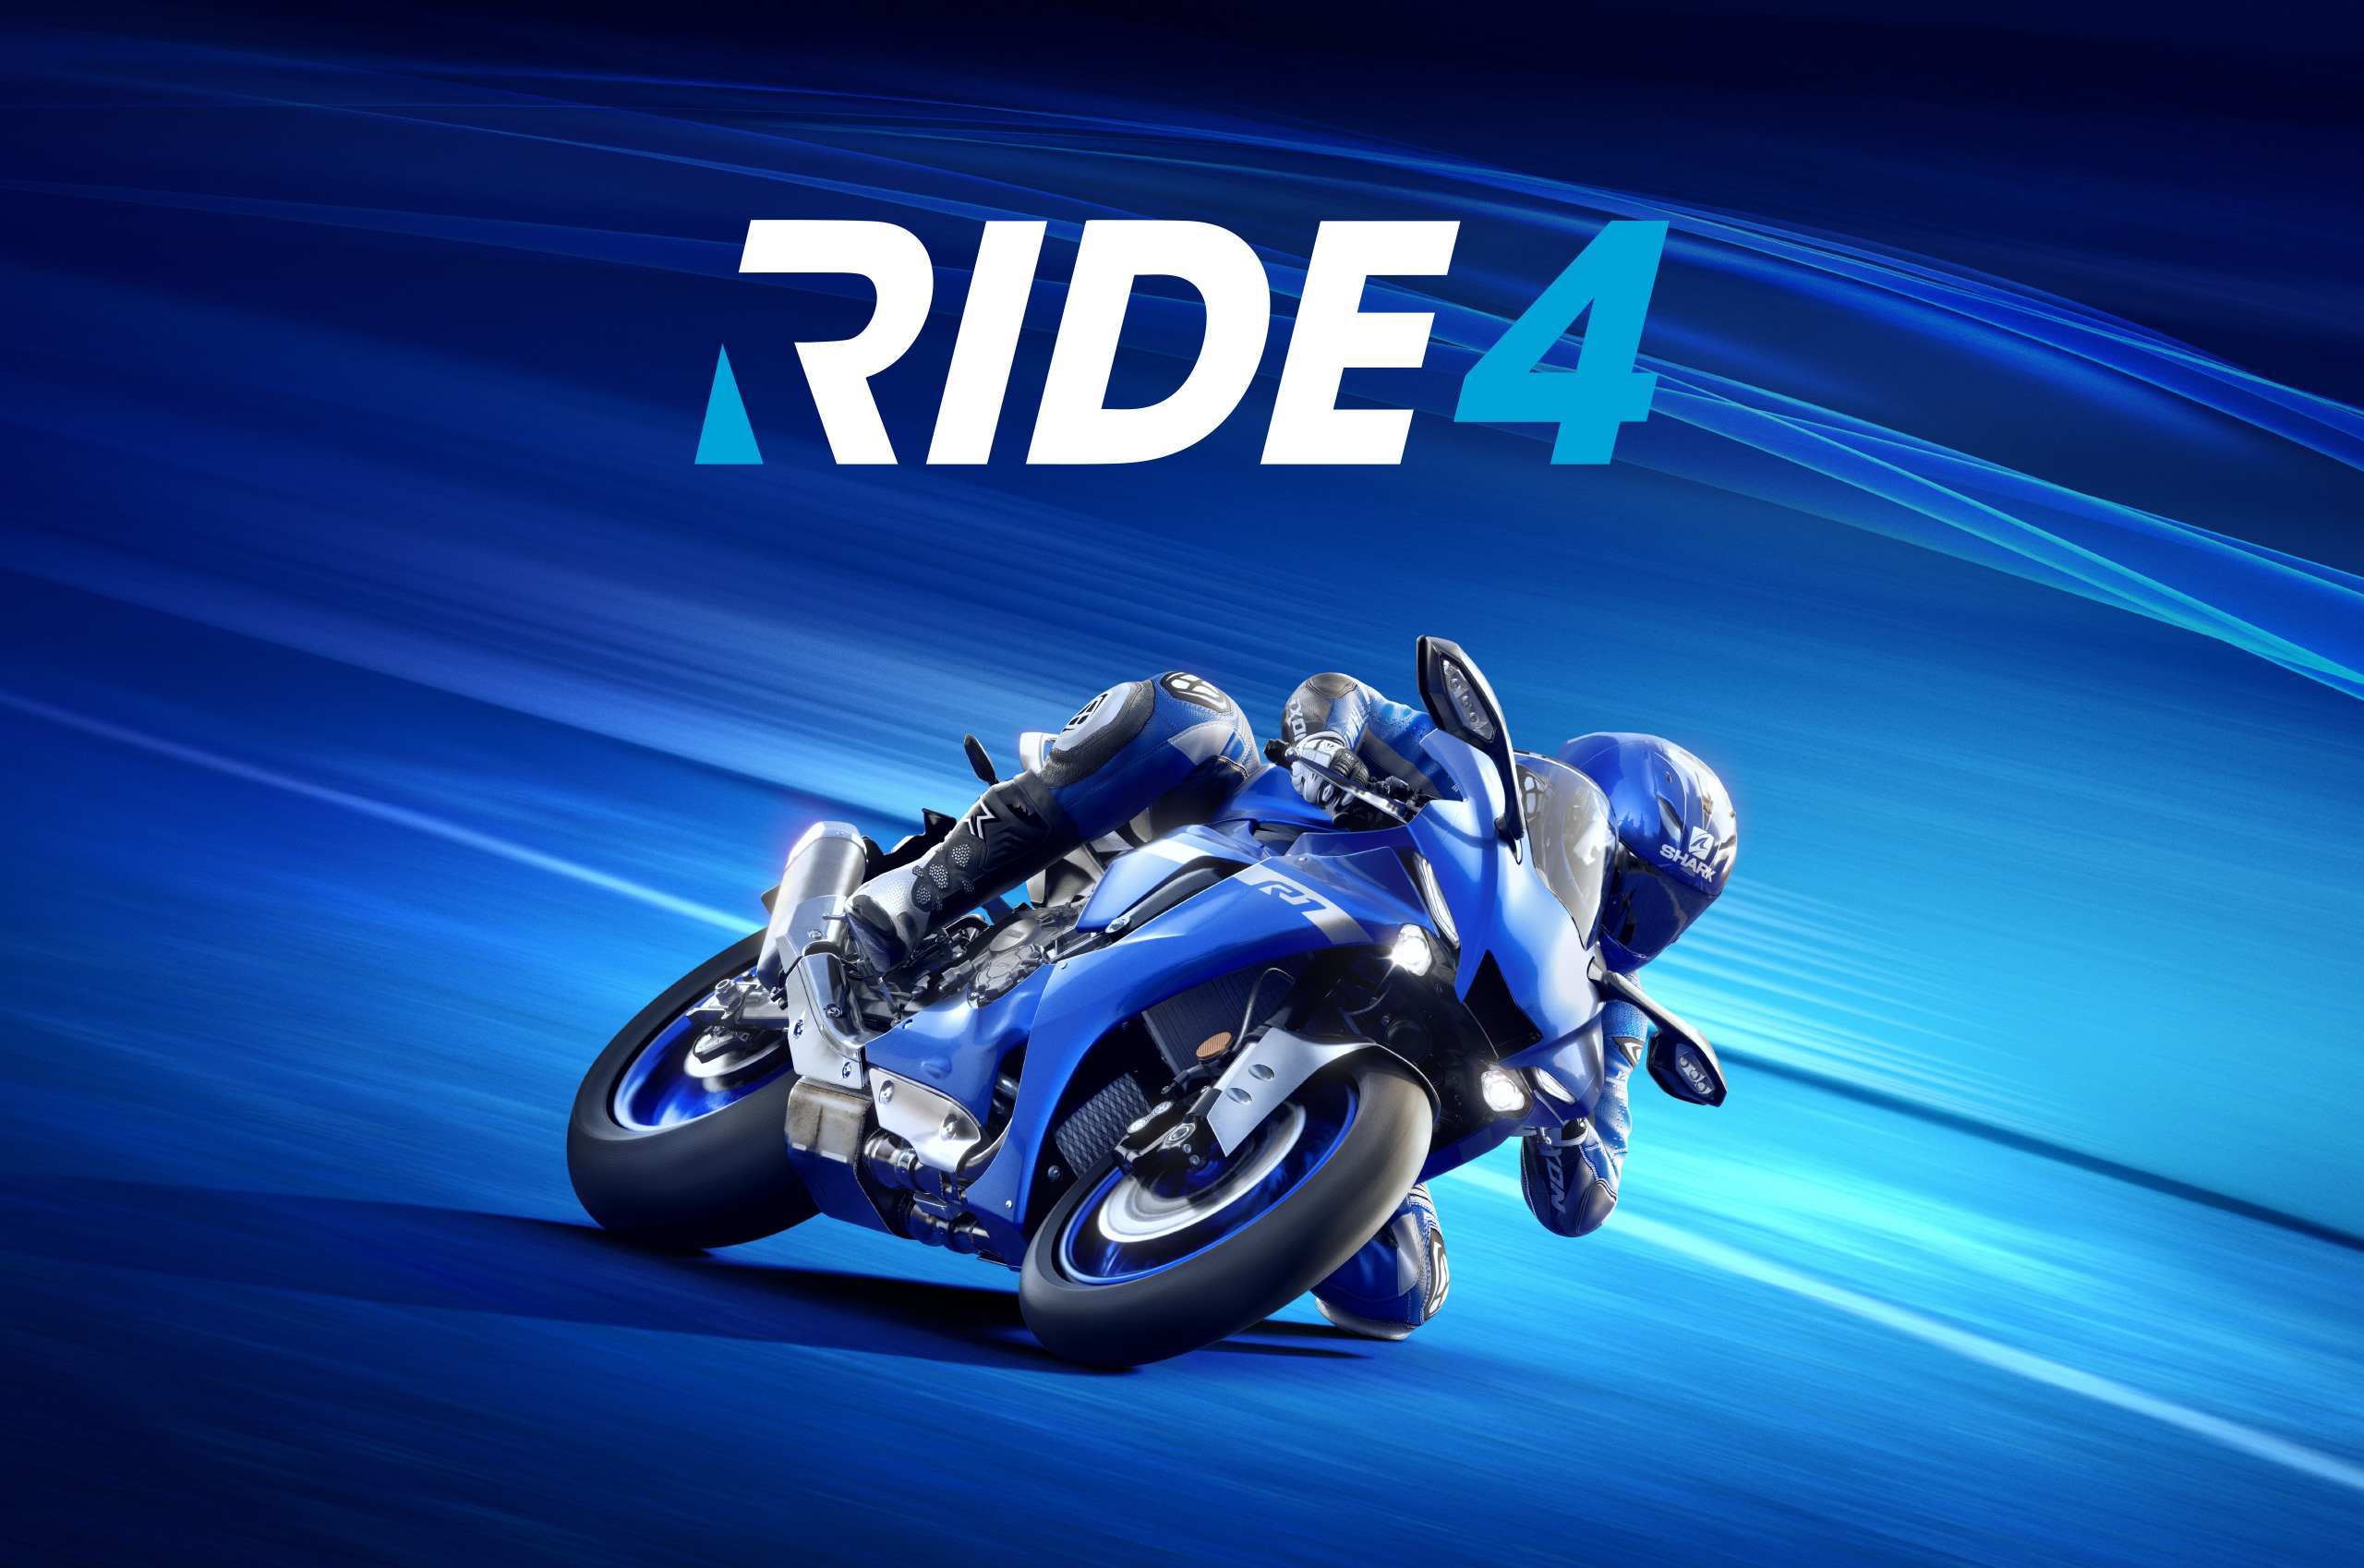 Ride 4 Is Coming To The PS5